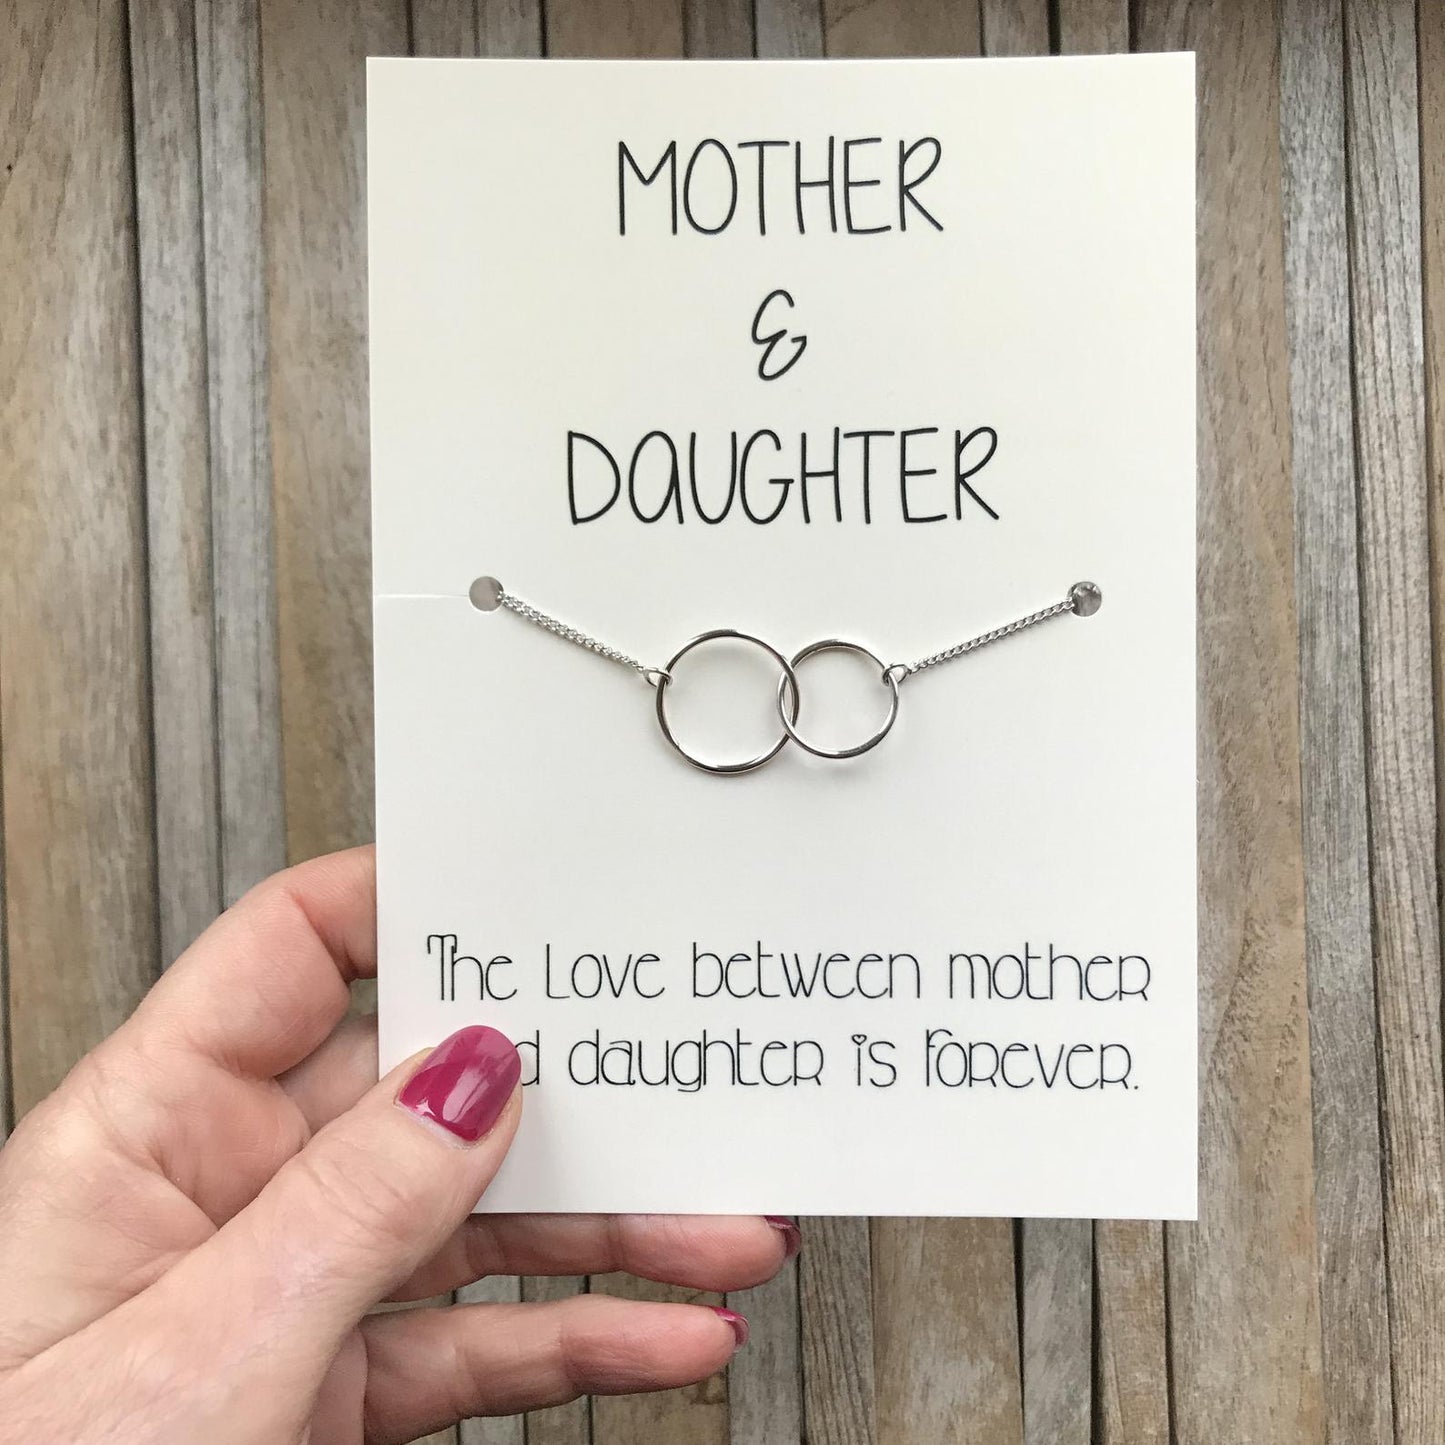 Mother daughter necklace